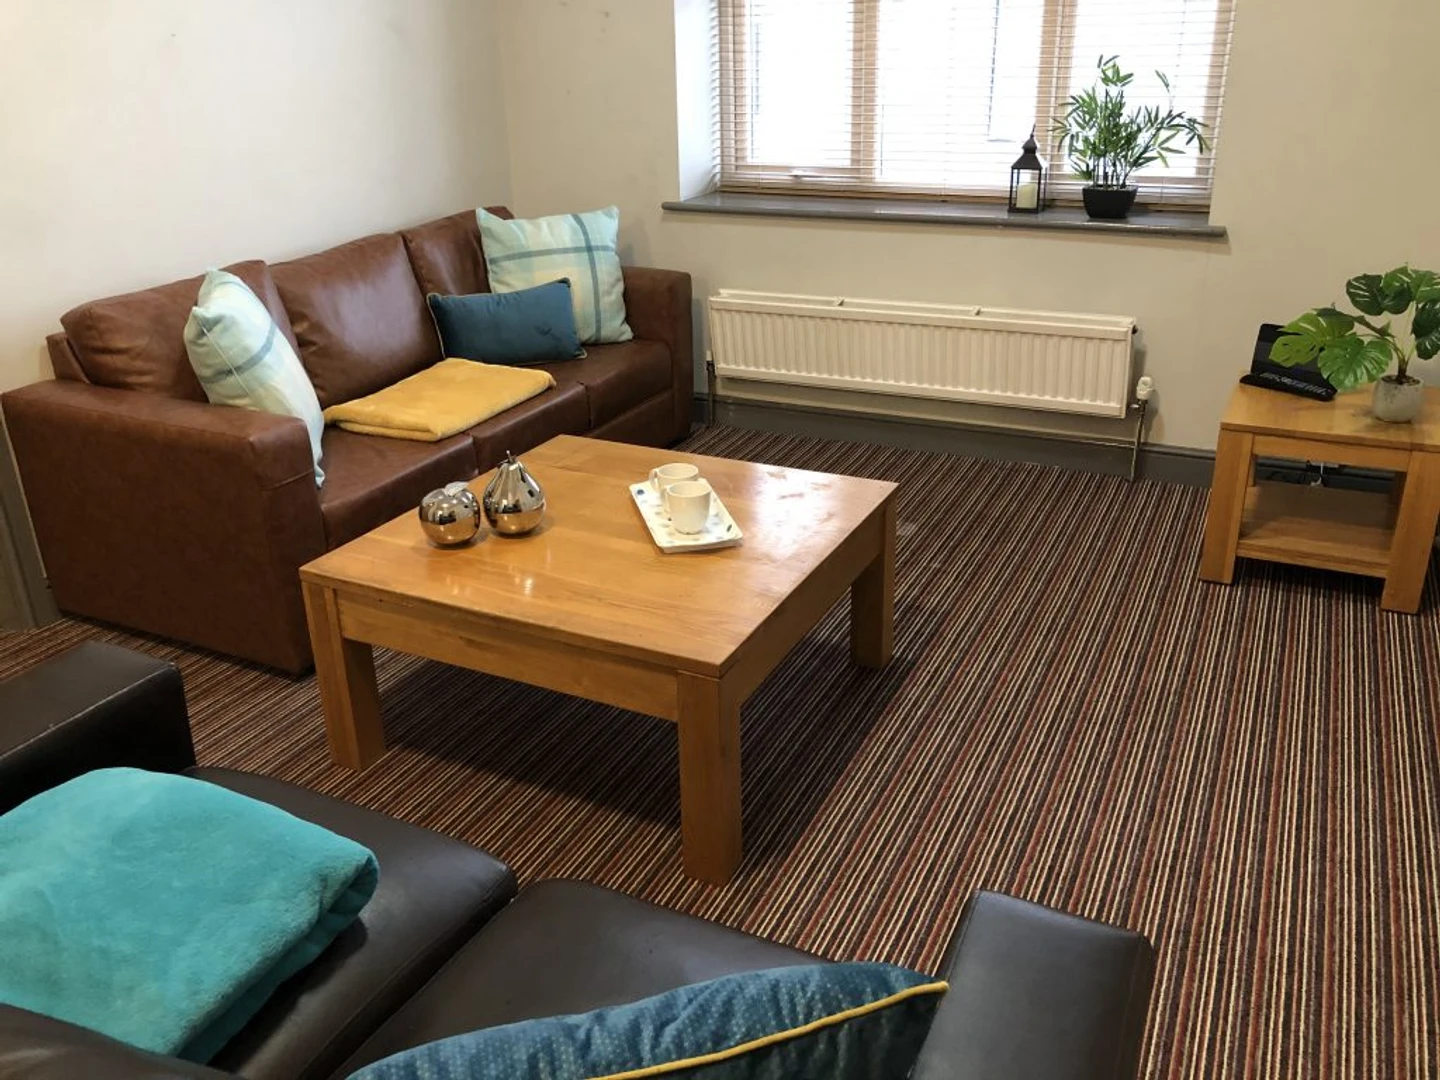 Room for rent in a shared flat in Sunderland